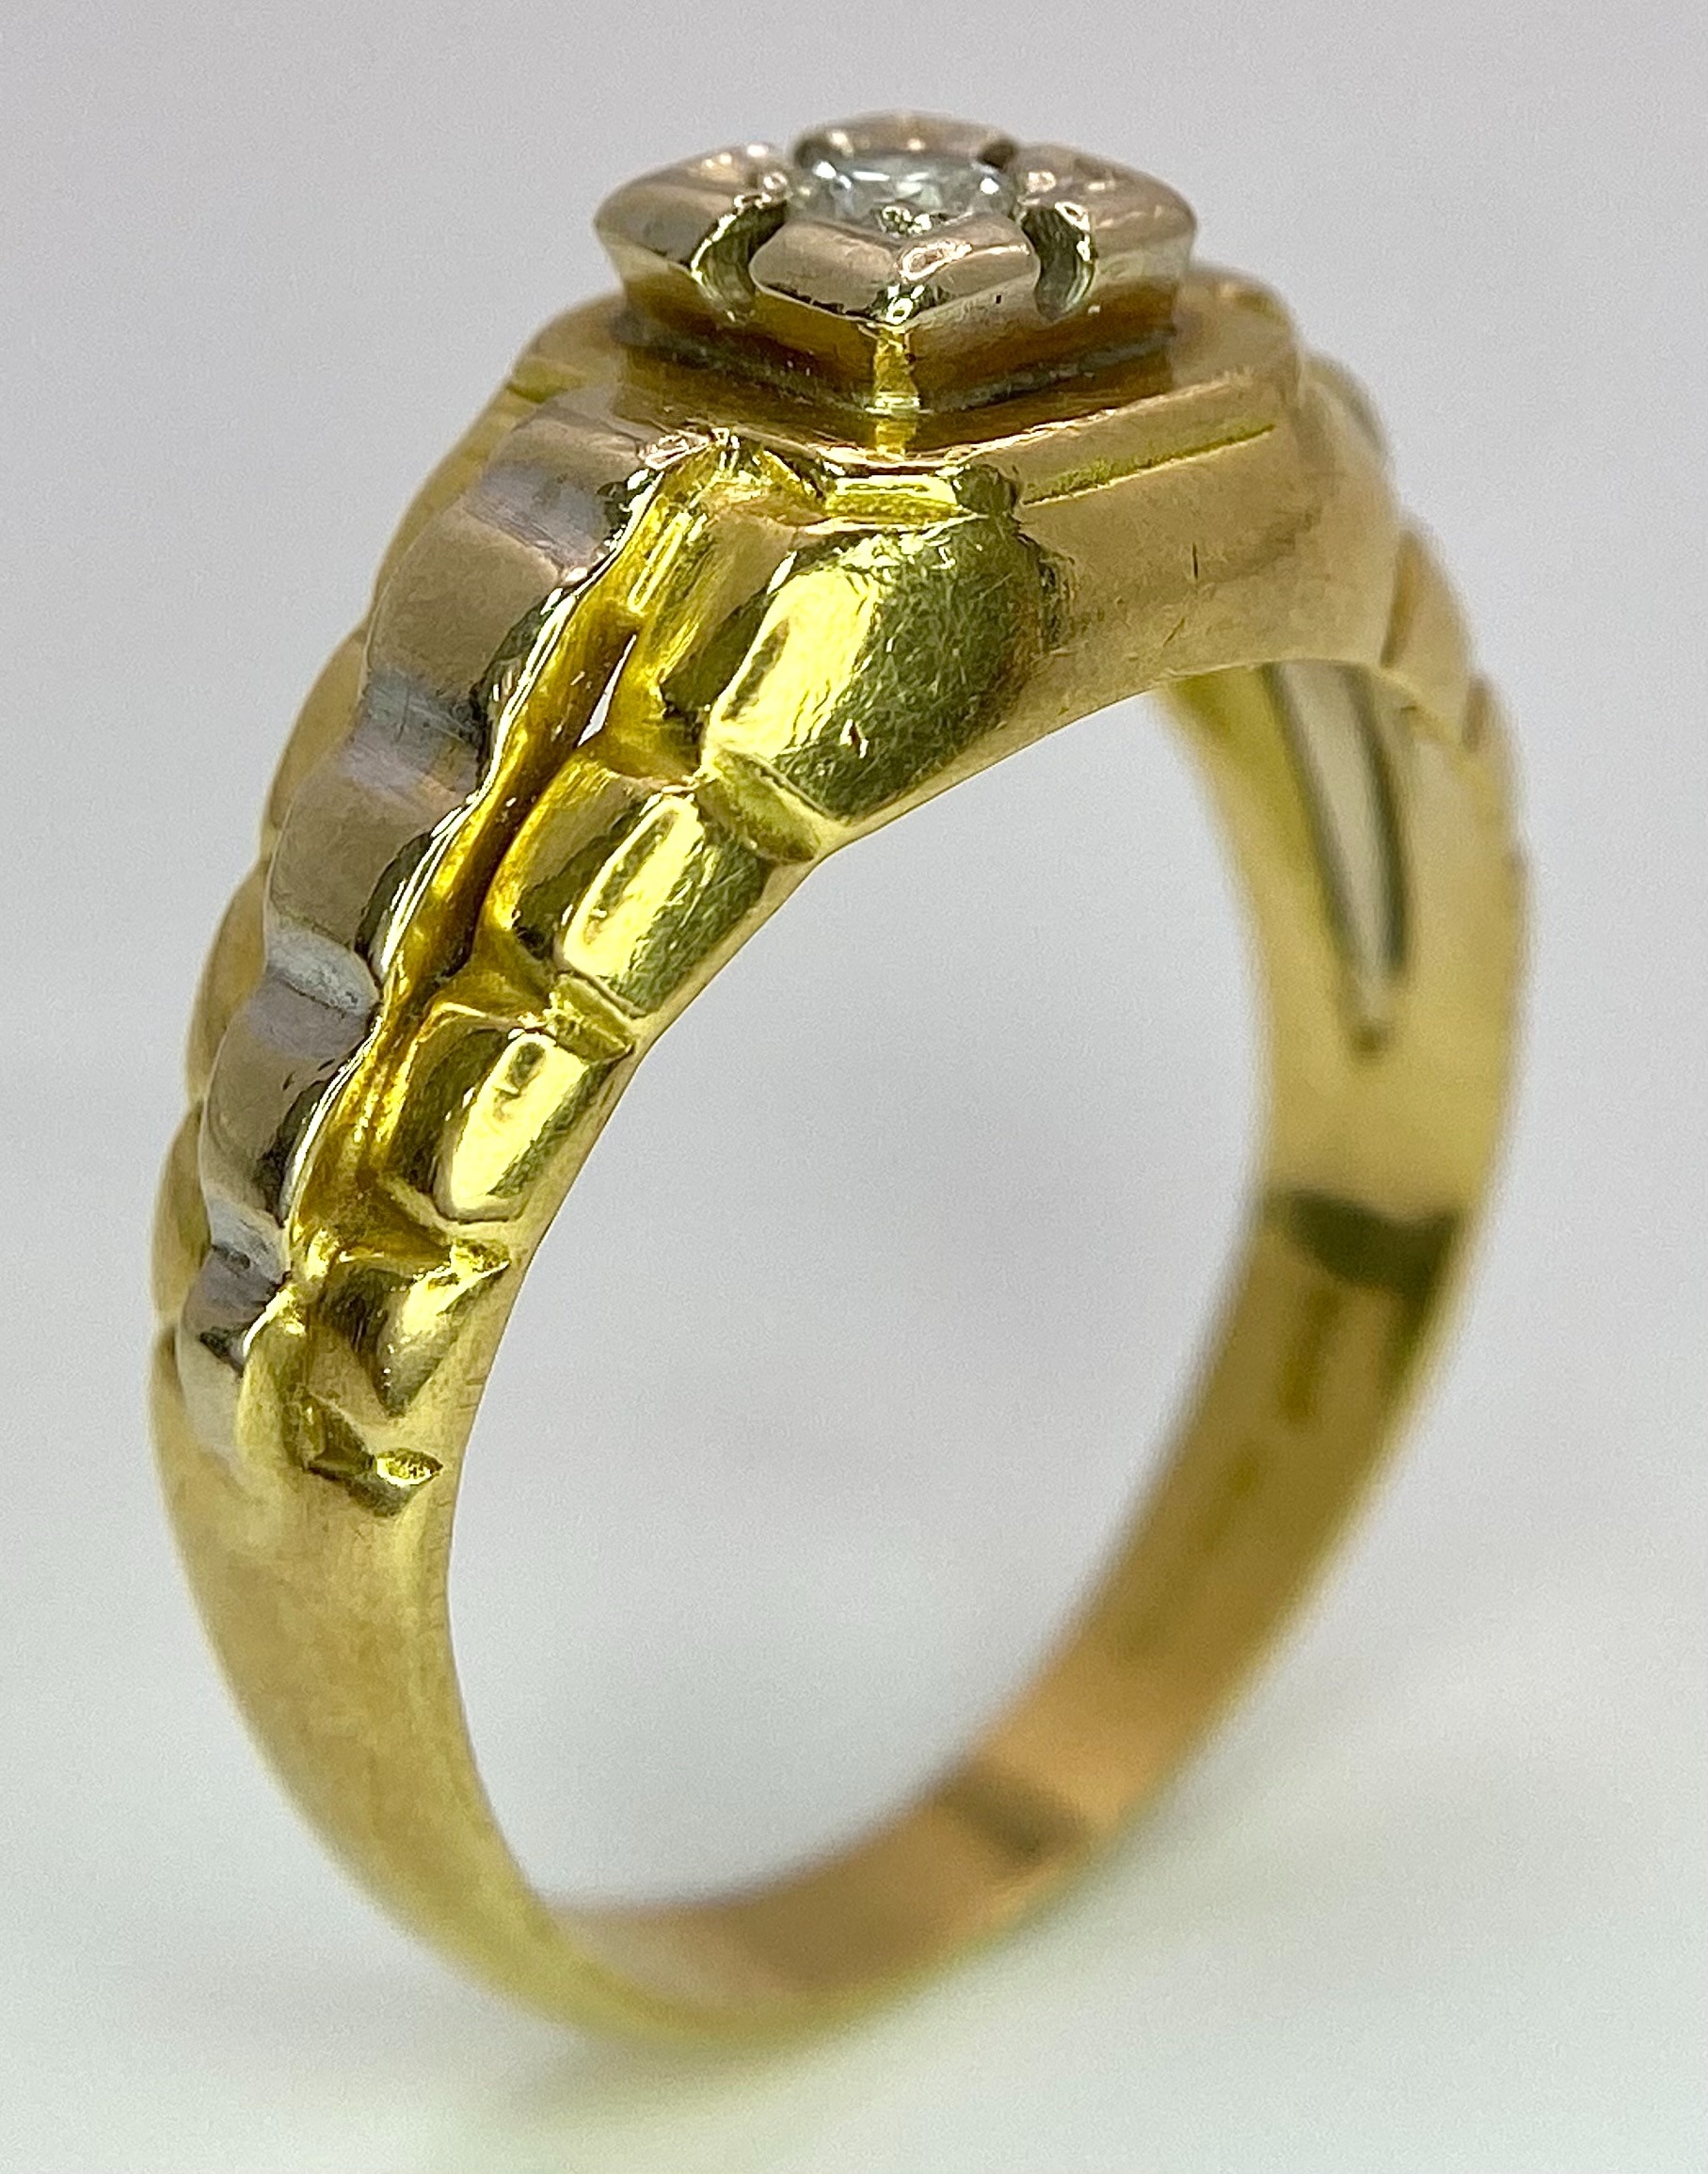 AN 18K TWO COLOUR ROLEX STYLE DIAMOND RING. 6.8G. SIZE P. - Image 4 of 10